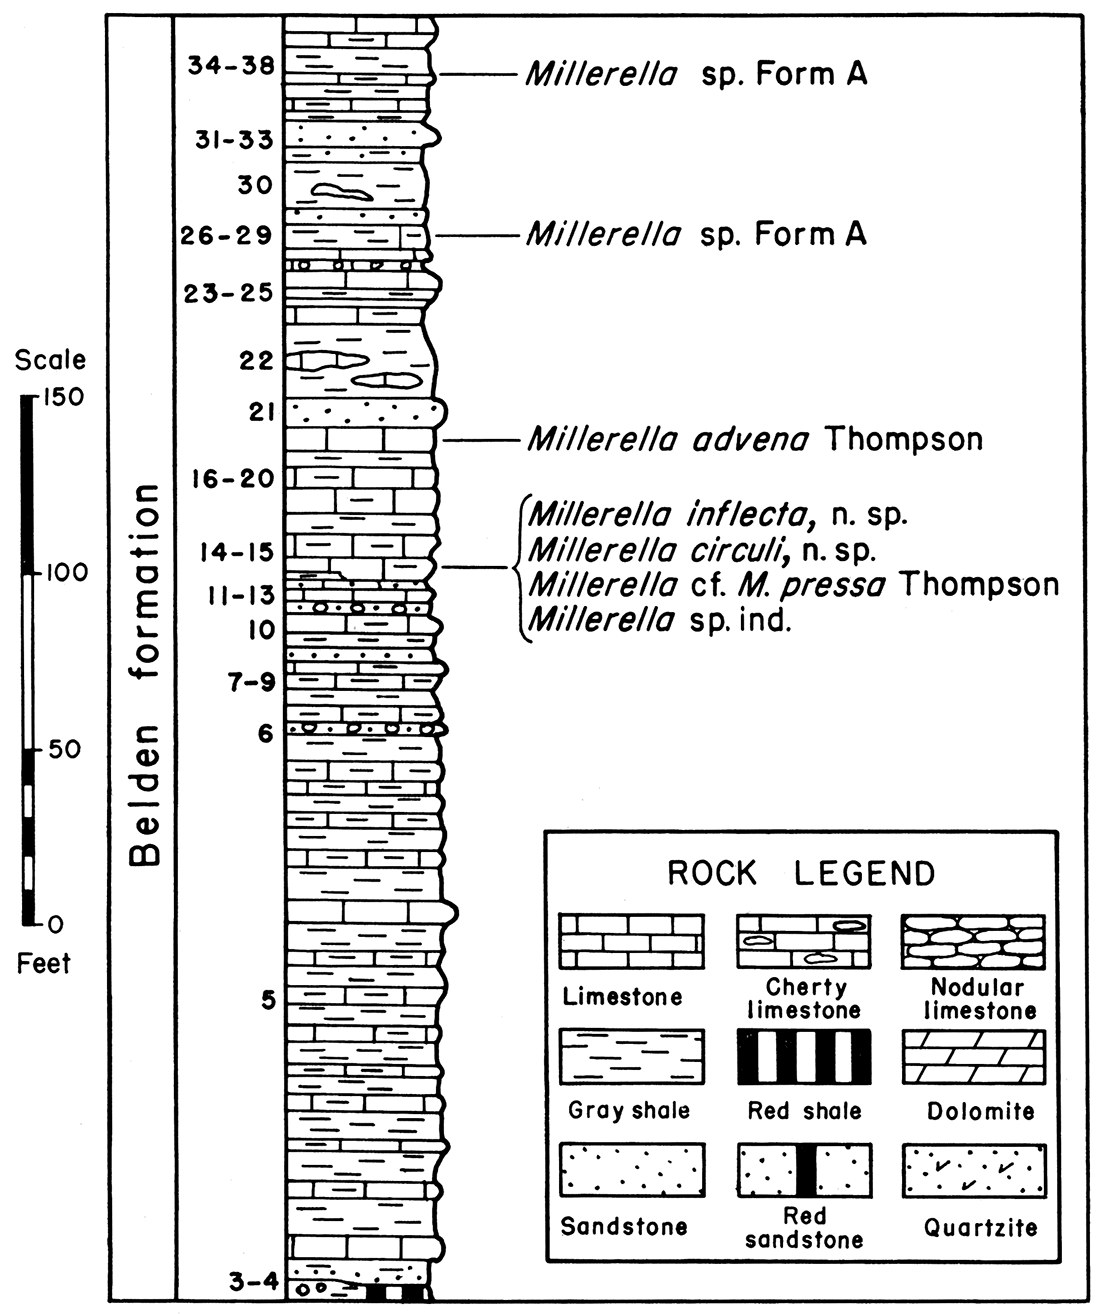 Diagram and fusulinid faunas of the Belden formation, Section P-15, Sweetwater Creek.